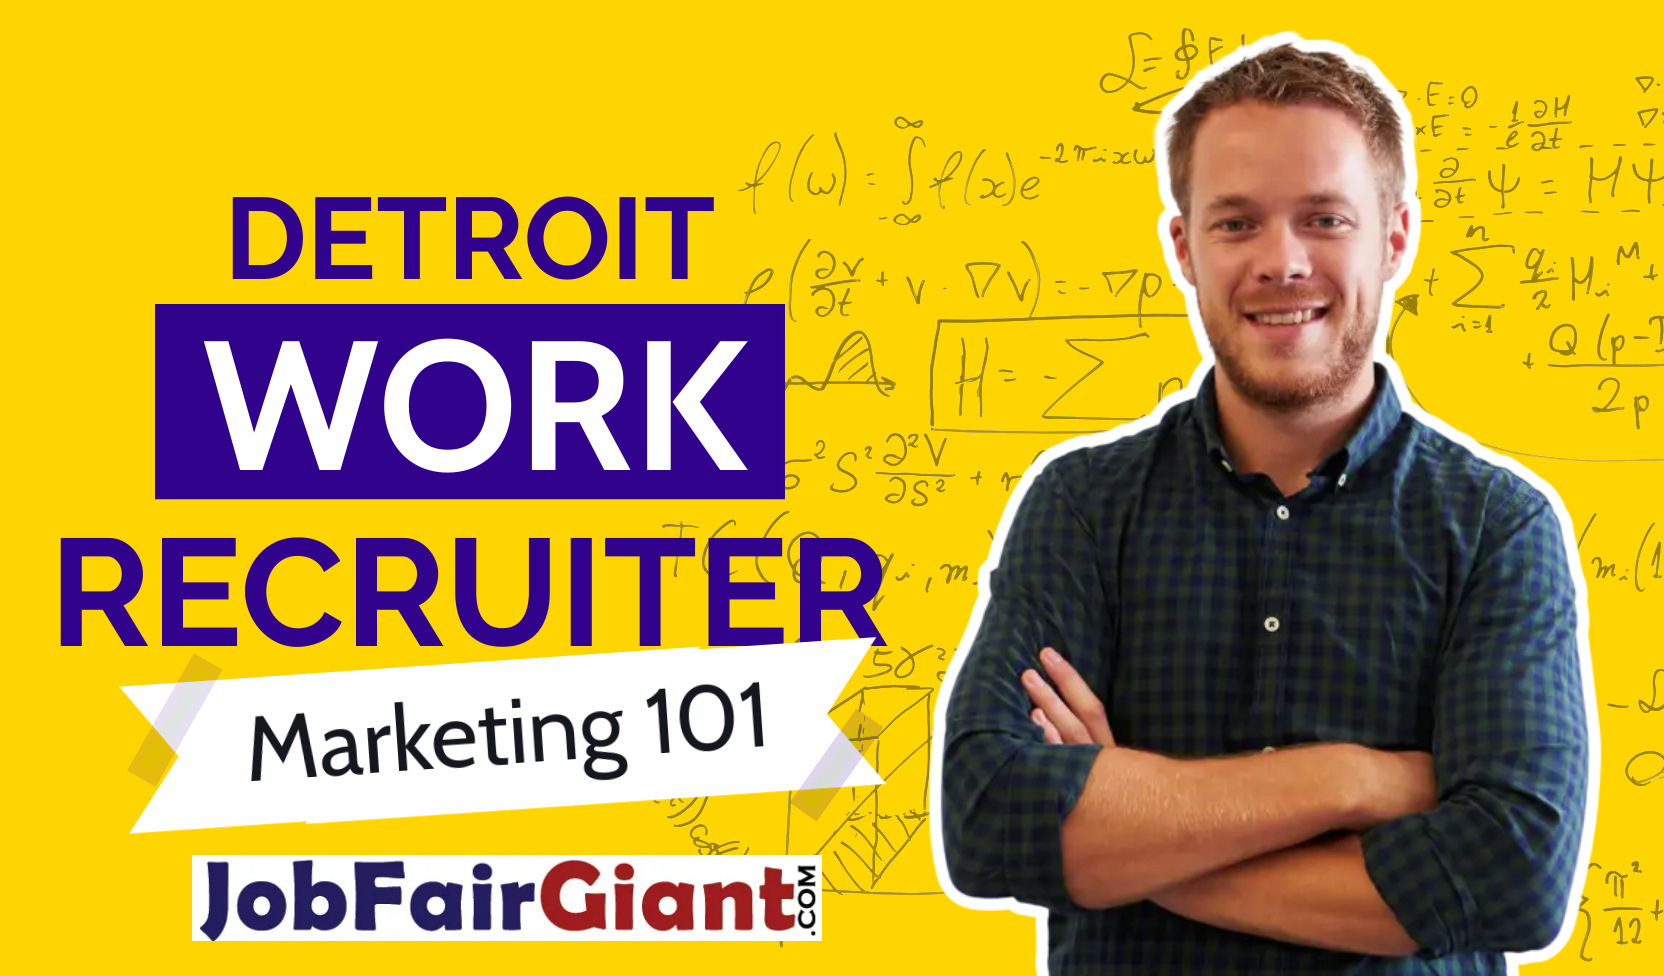 Detroit Marketing Ideas For Recruiters: Crafting Your Strategy